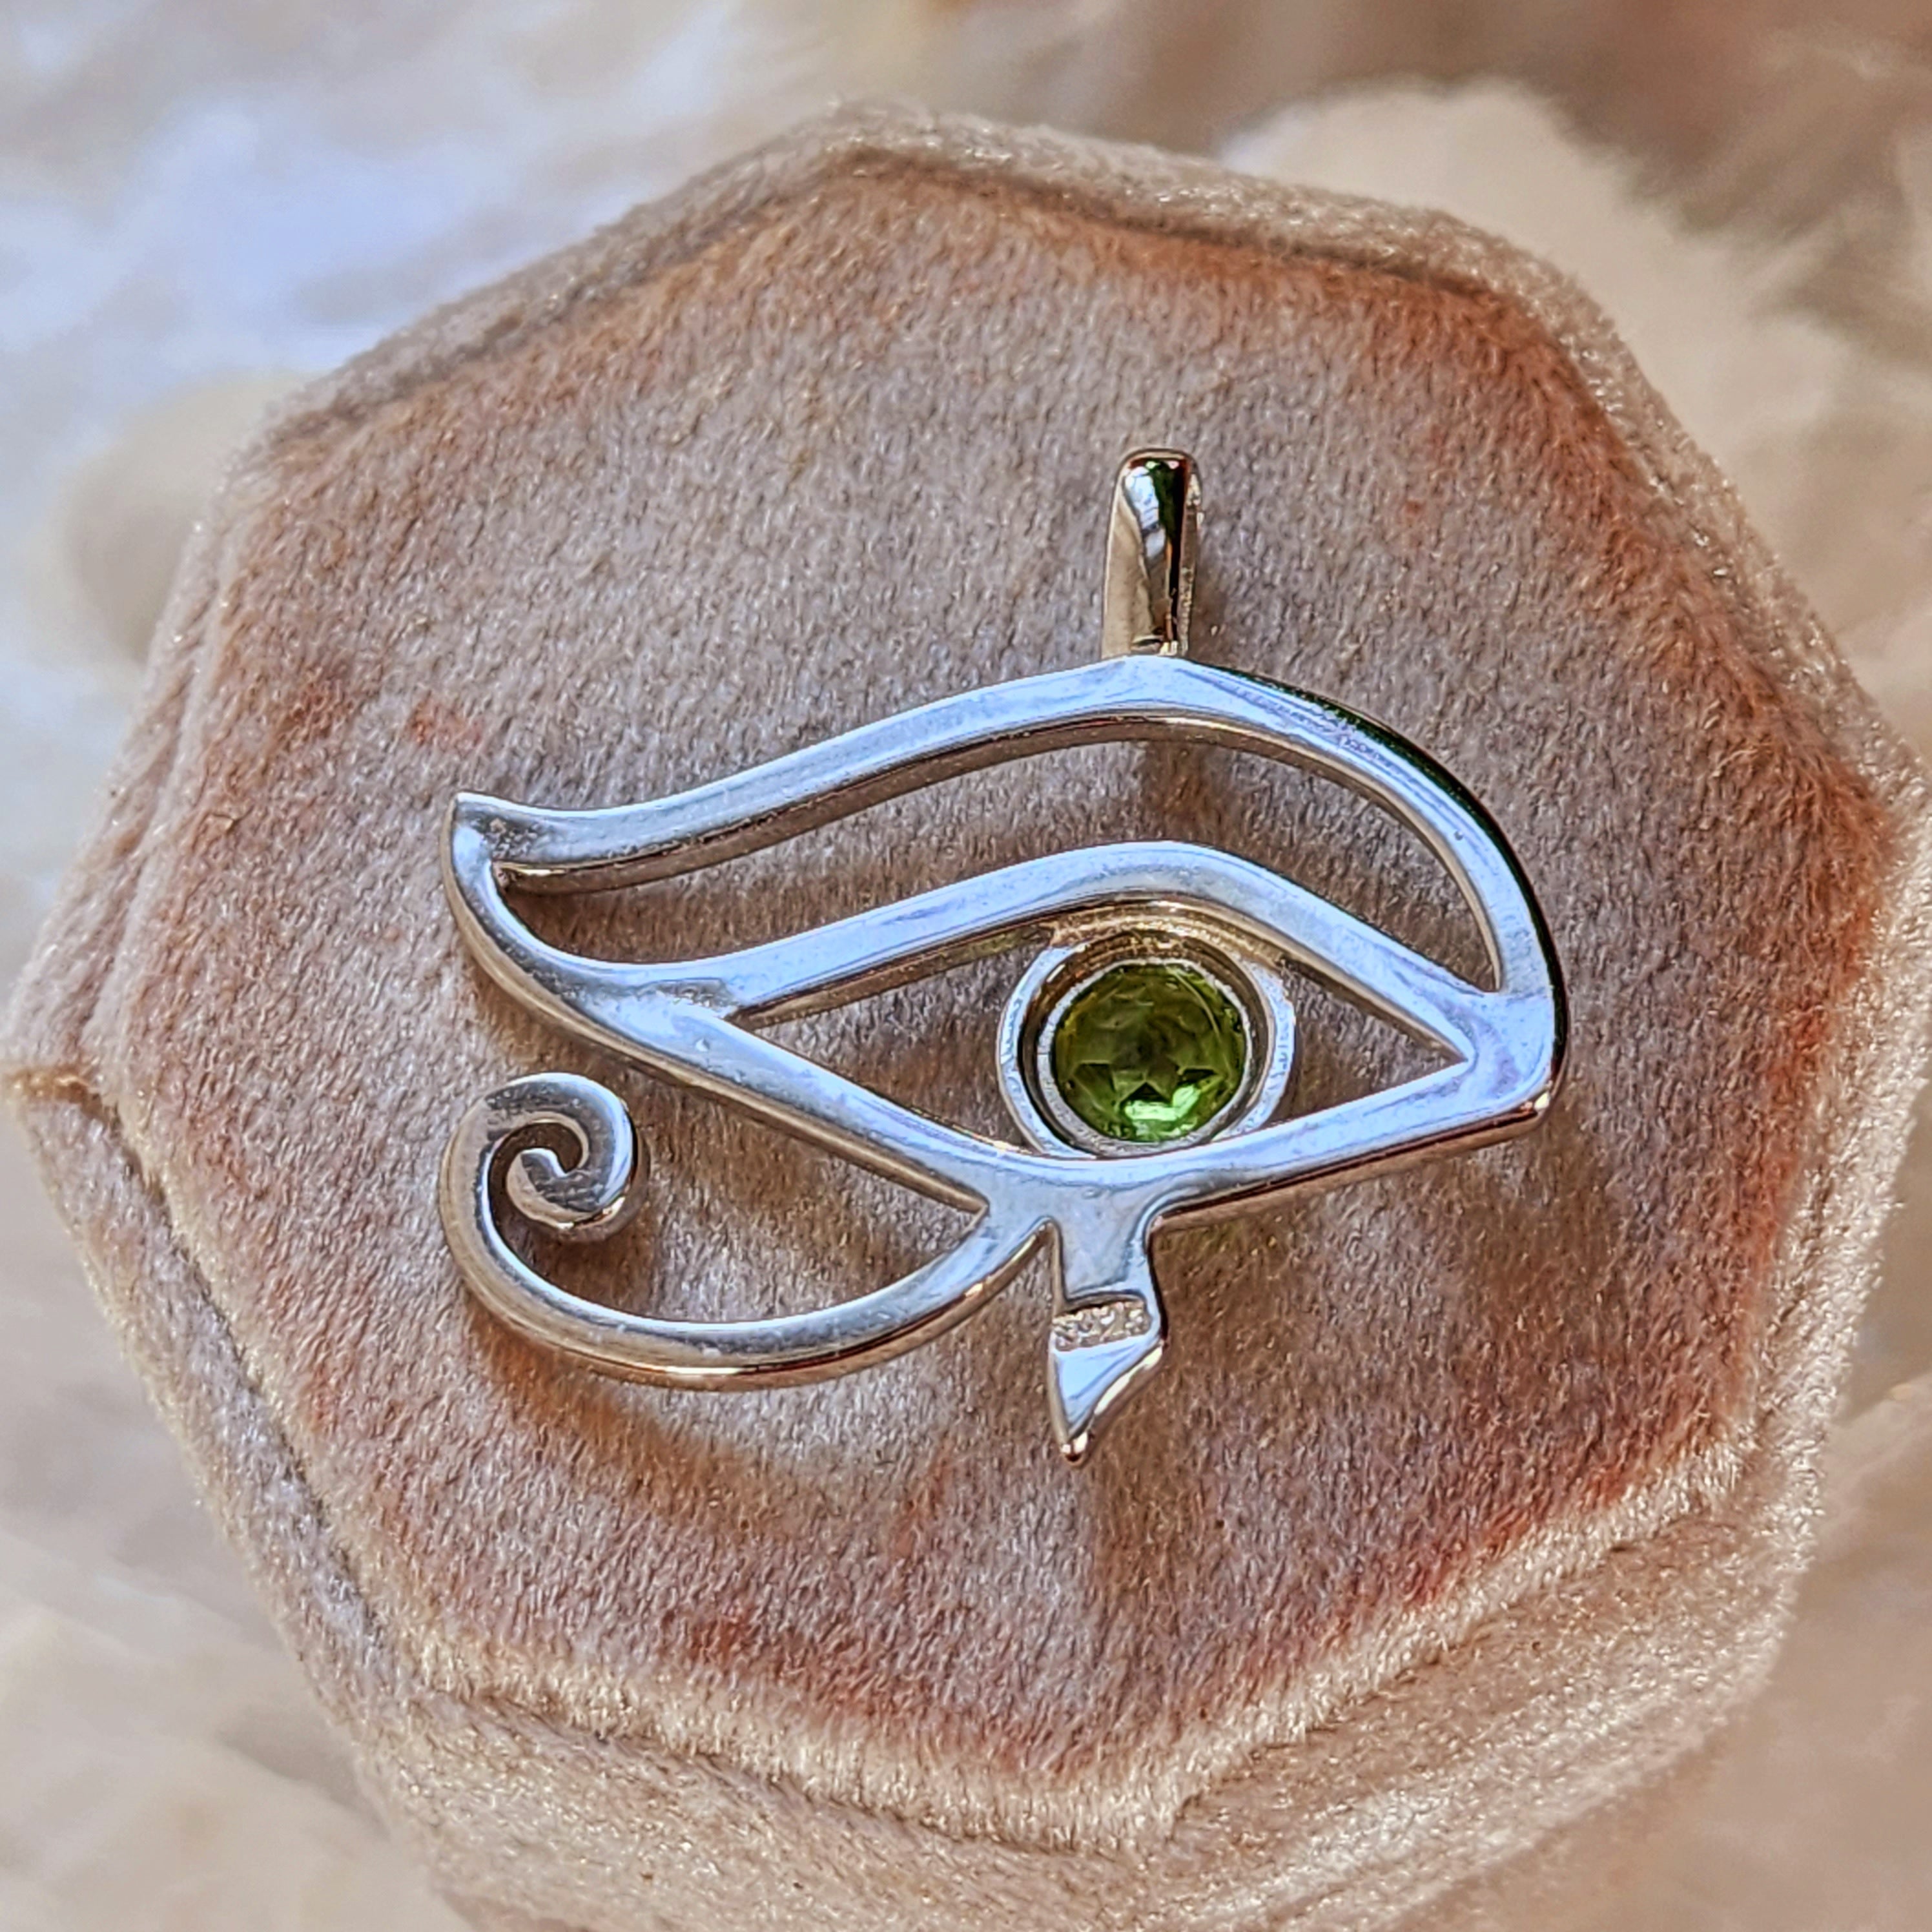 Peridot Eye of Horus Amulet Pendant .925 Silver for Good Luck, Prosperity & Protection